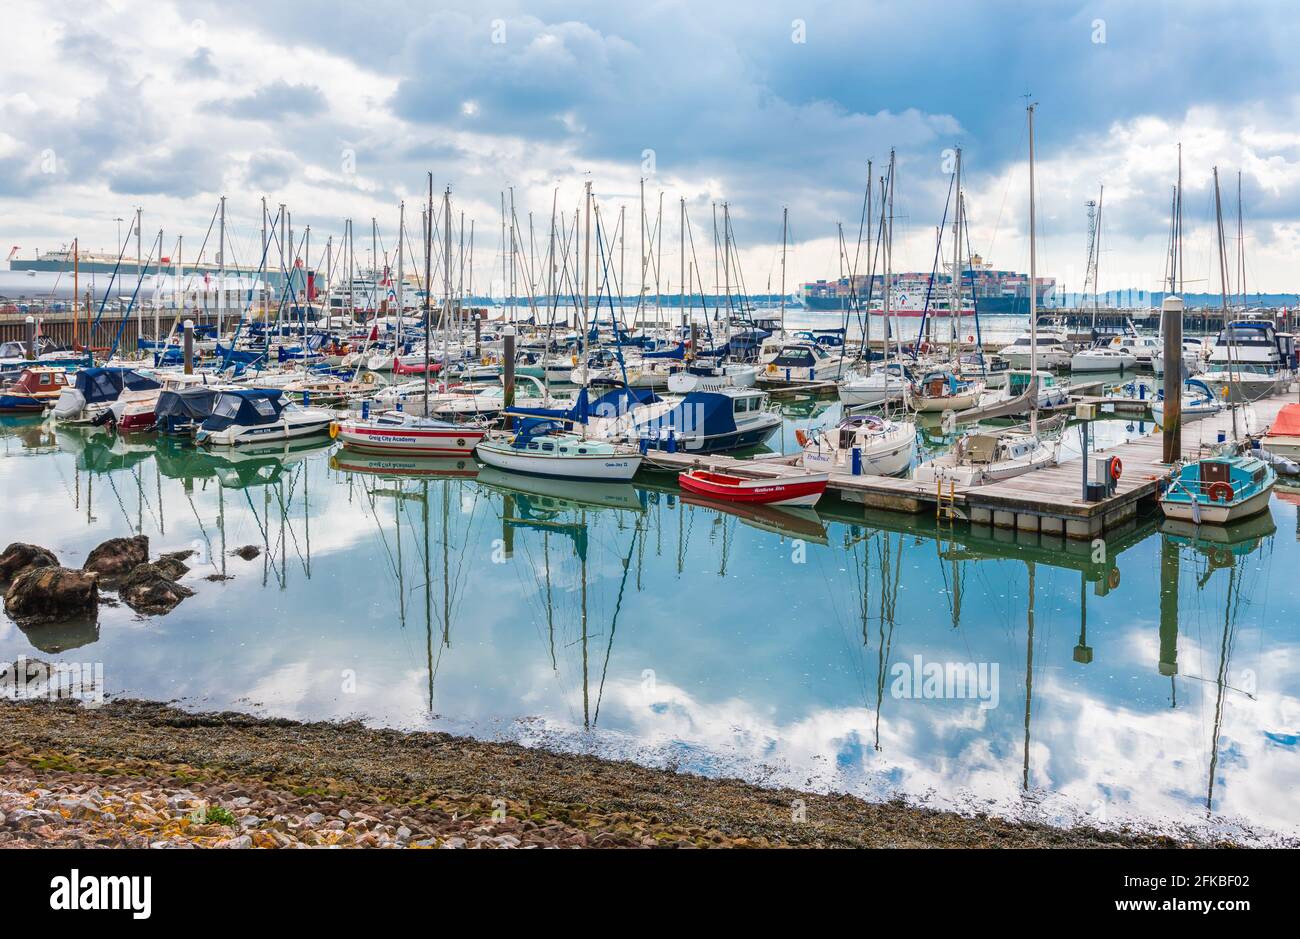 Yachts and boats moored in Town Quay Marina in Winter in Southampton, Hampshire, England, UK. Stock Photo